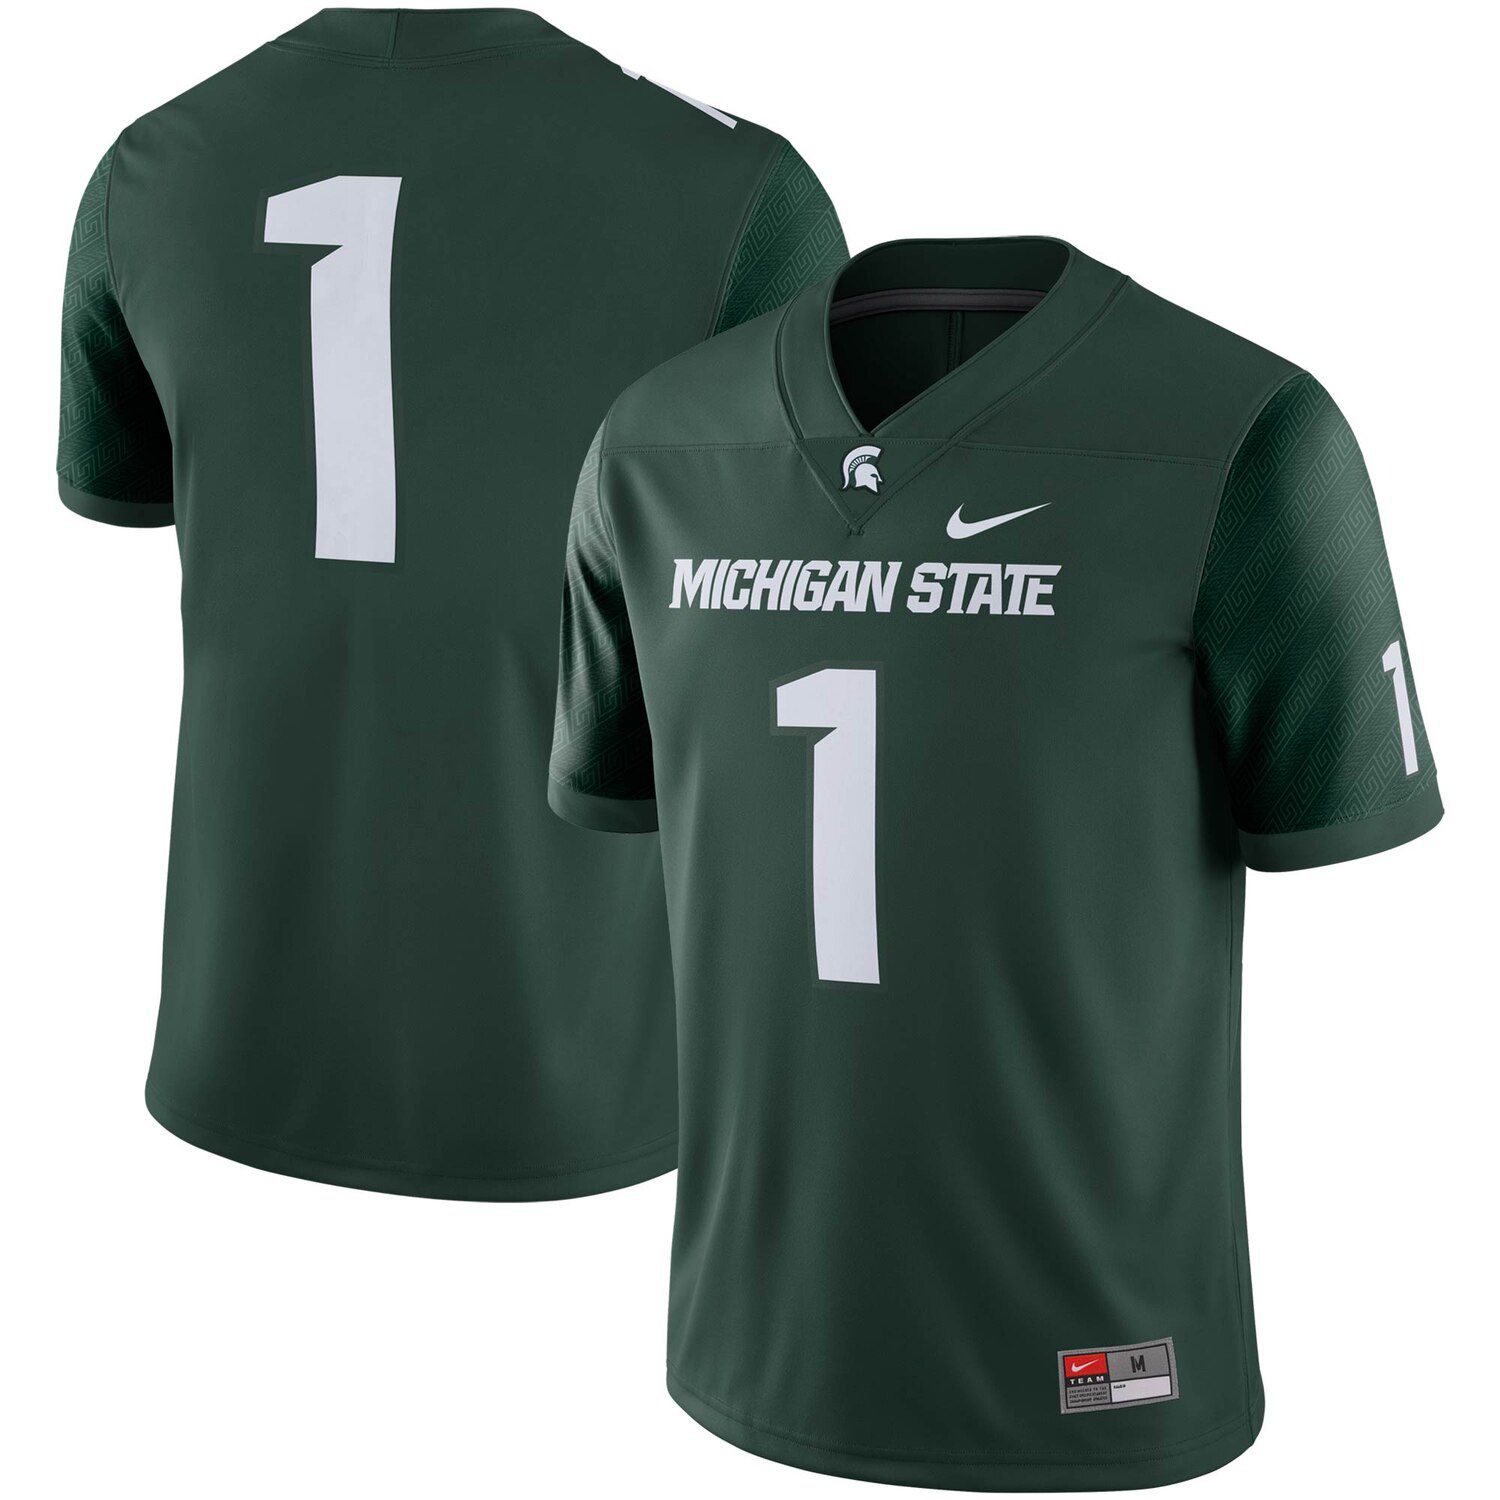 michigan state spartans jersey